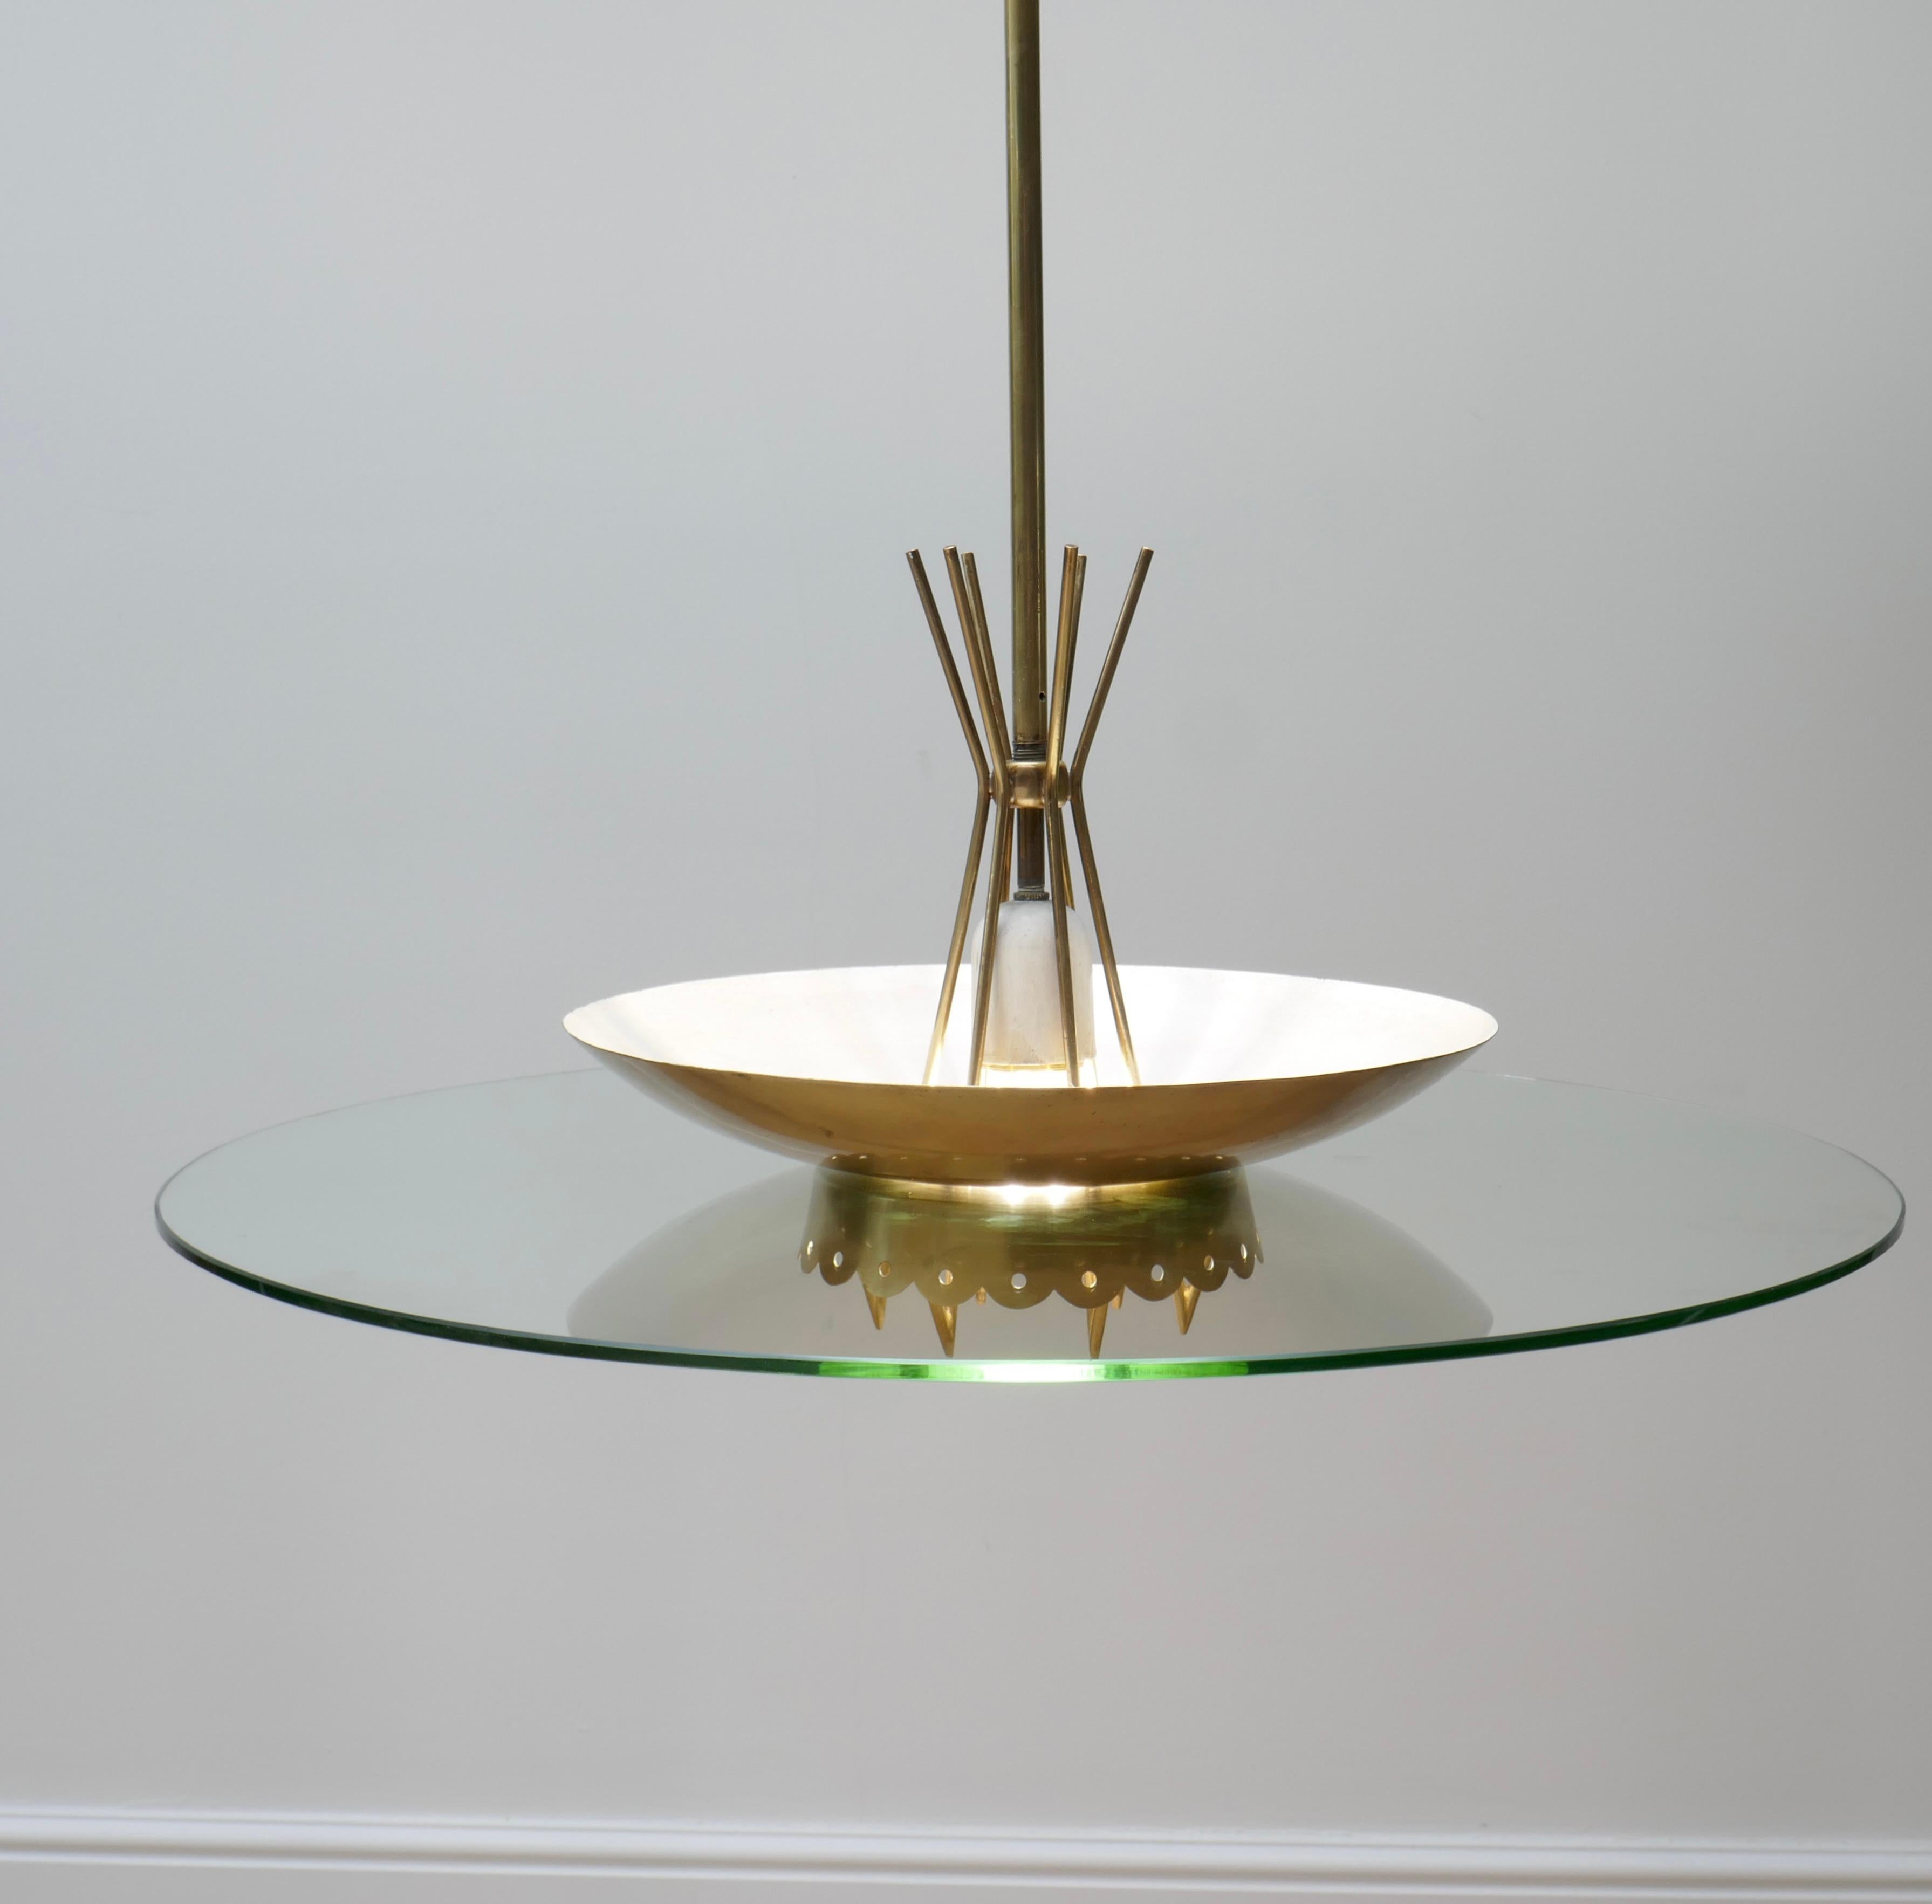 Italian Glass and Brass Saucer Chandelier, 1950s For Sale 1